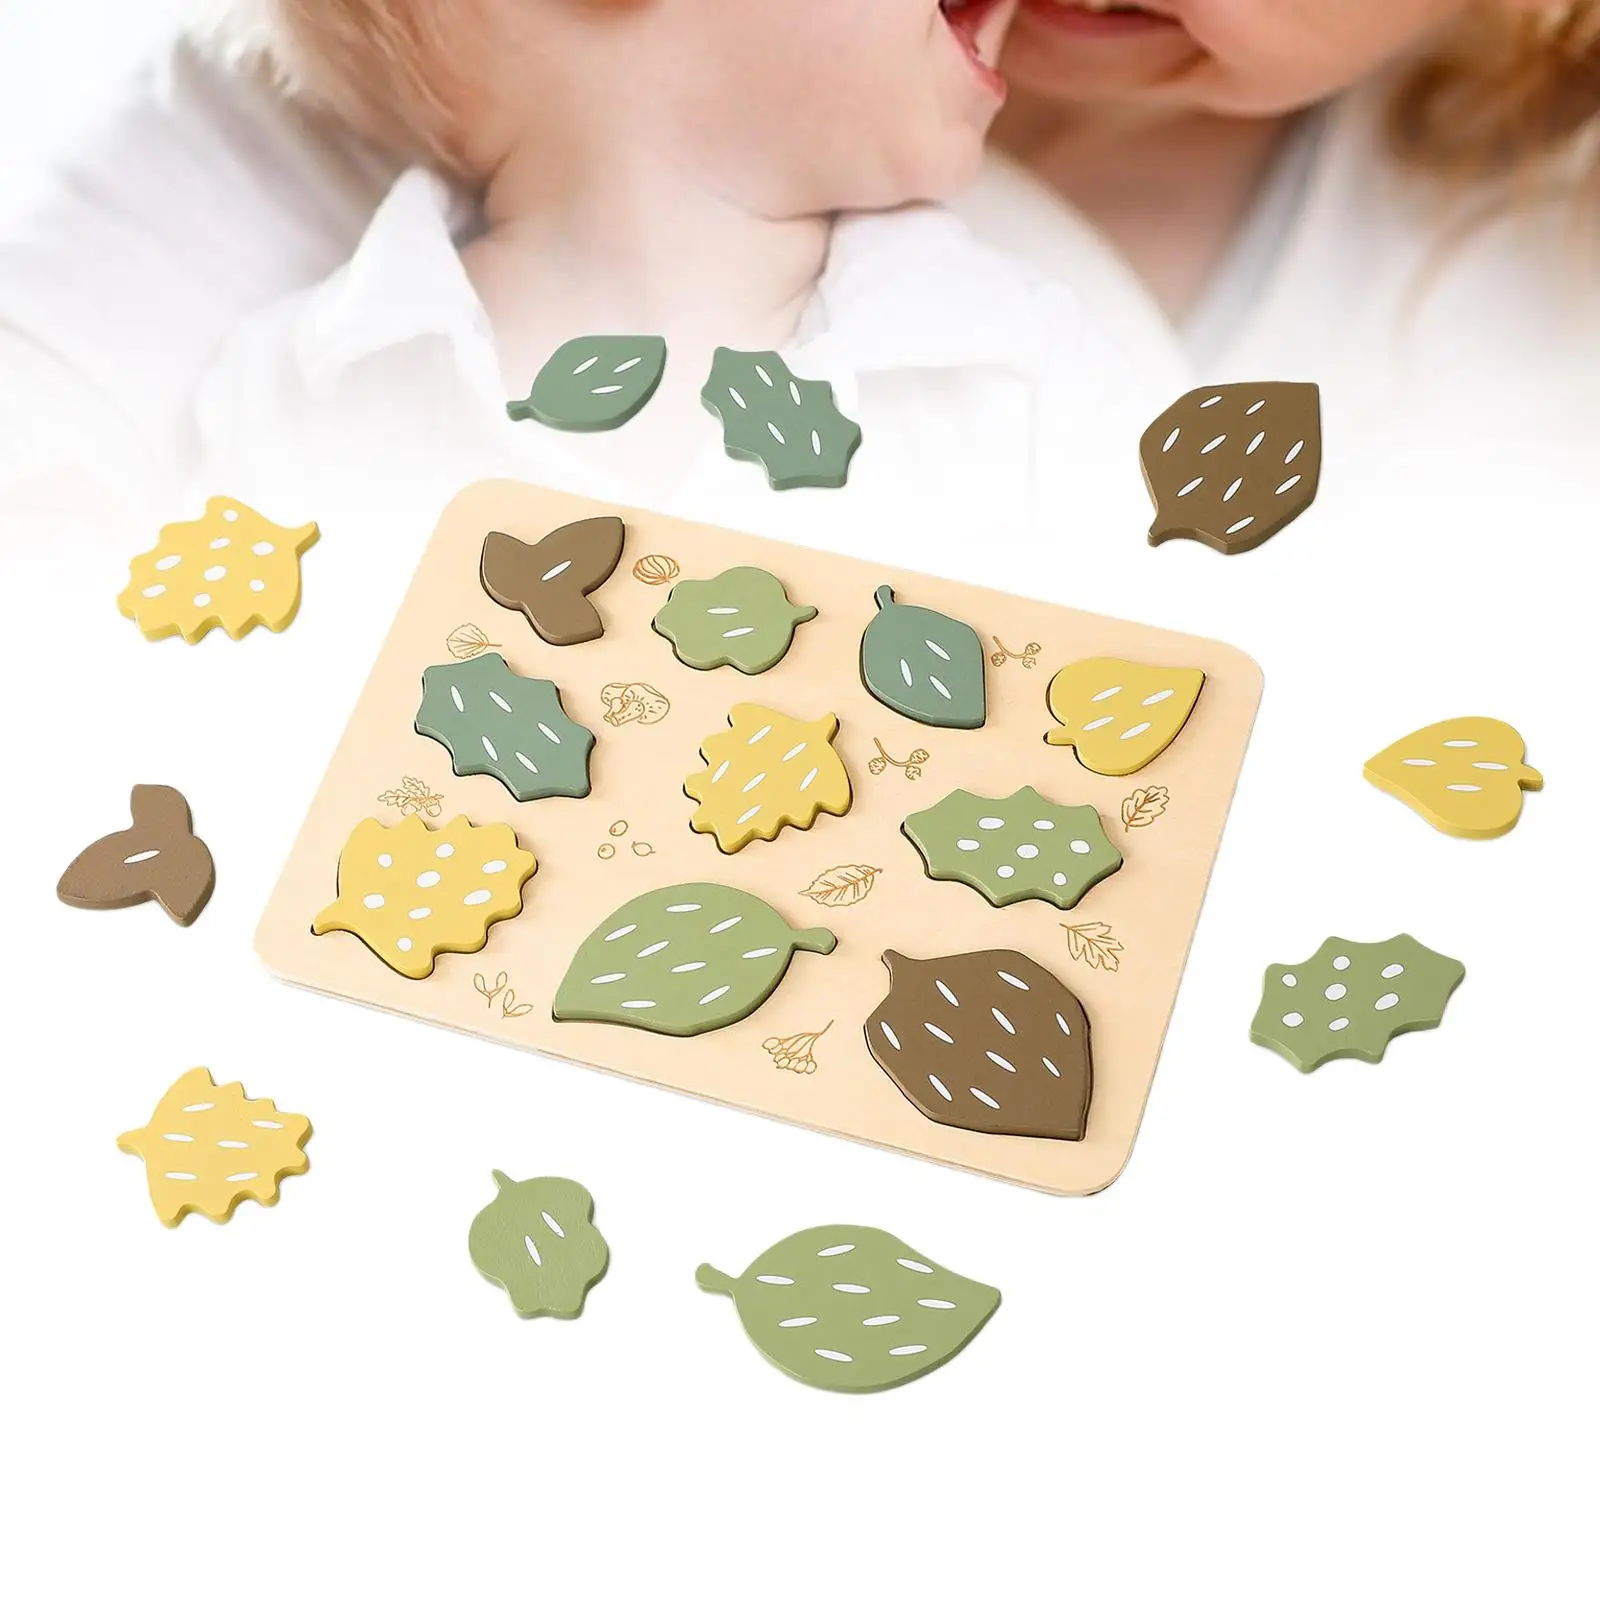 Leaf Jigsaw Puzzles Hand Eye Coordination Colorful Shape for Girls Kids